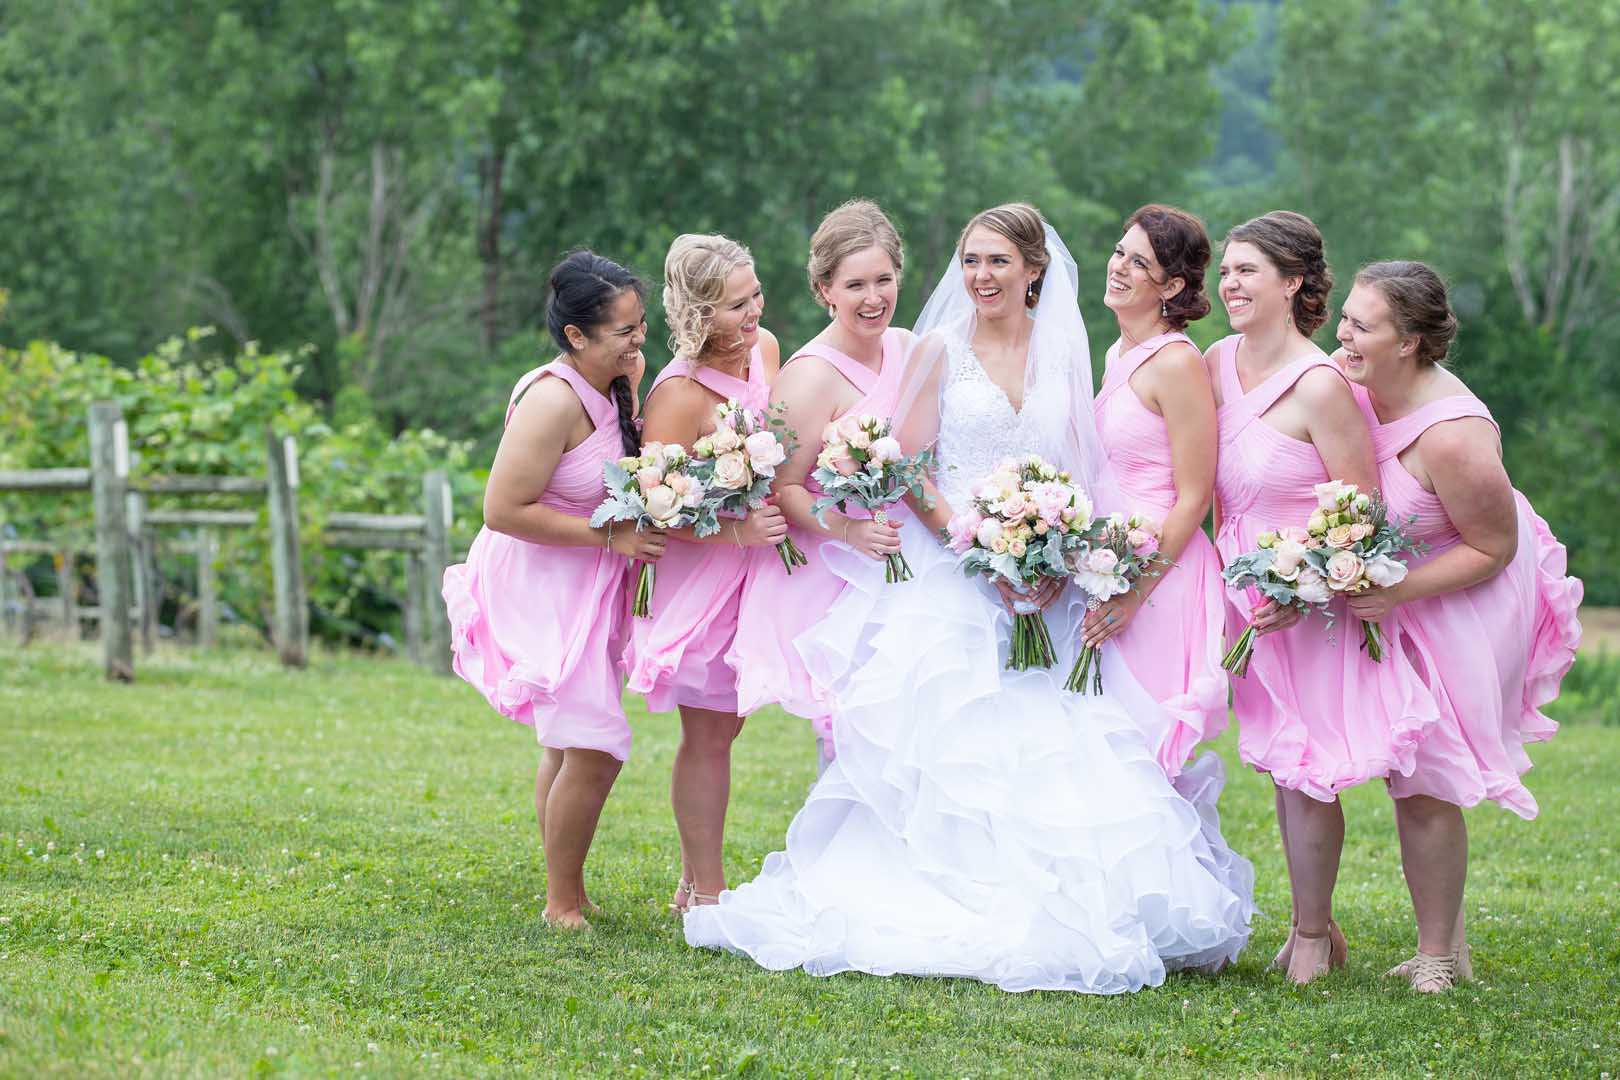 Bridesmaids laughing together outside before the wedding ceremony